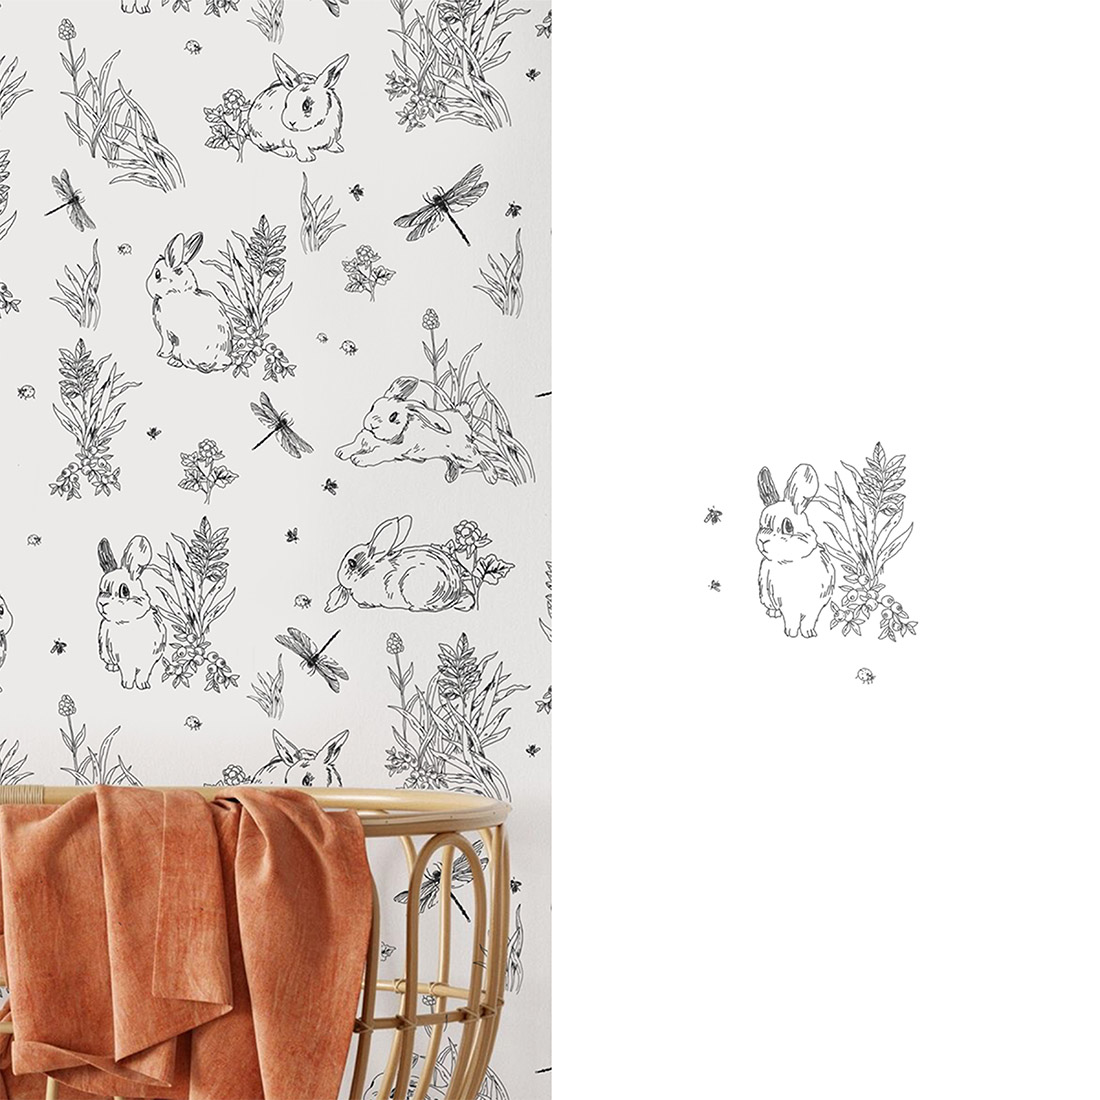 Black and white pattern with rabbits and plants